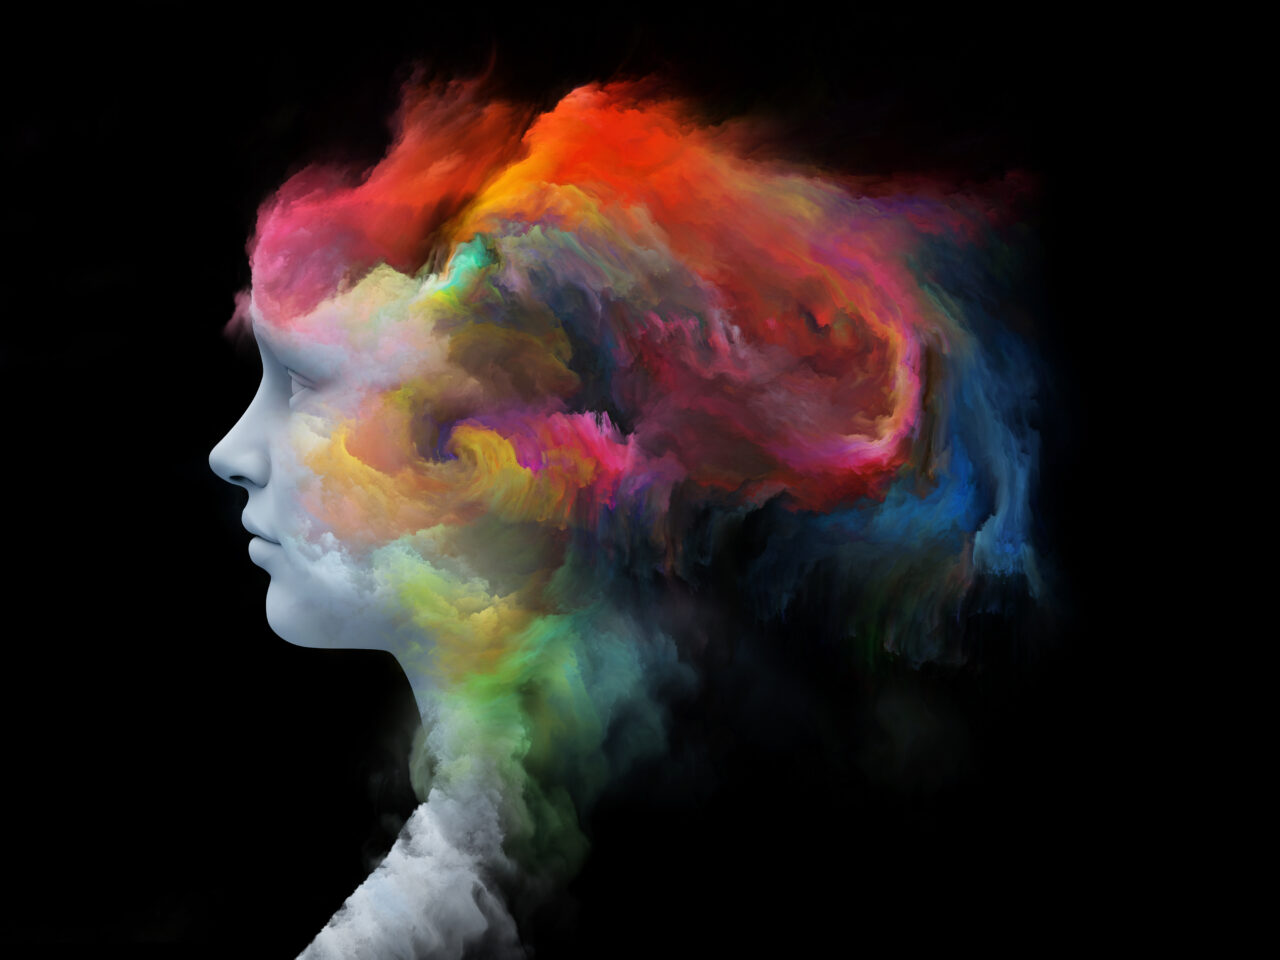 an image showing colourful brain illustrating emotional intelligence and CX